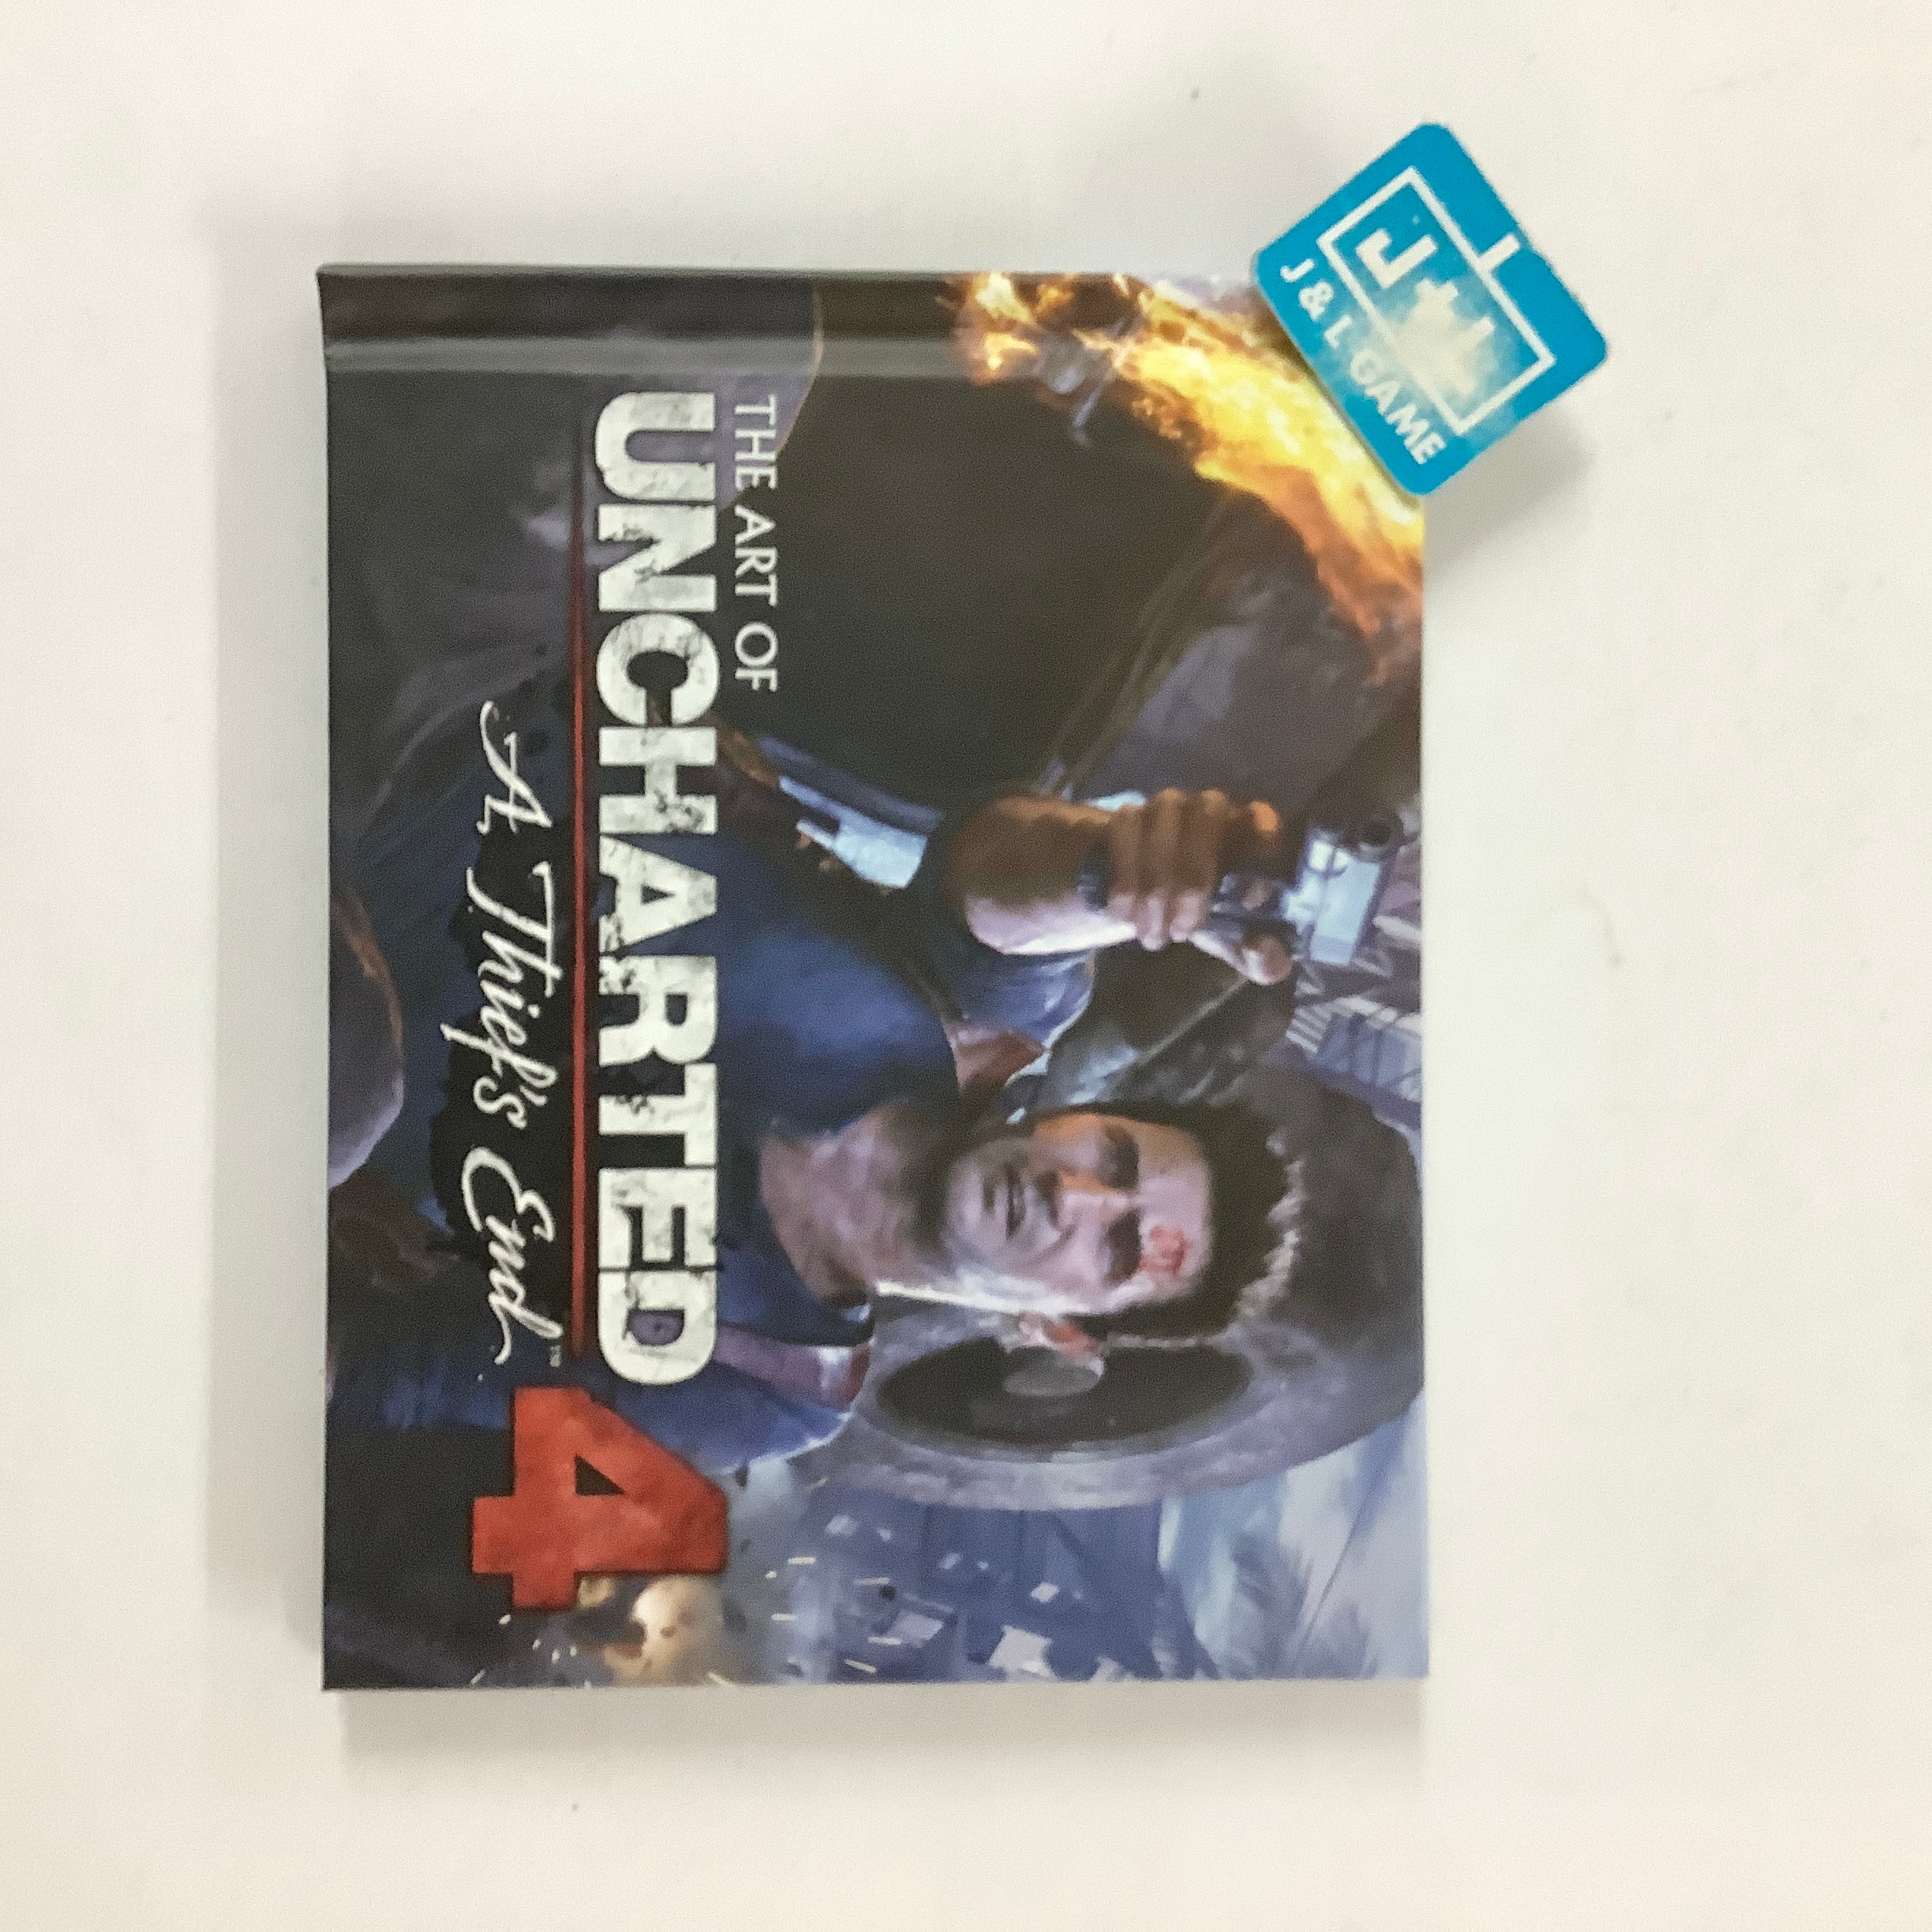 Uncharted 4: A Thief's End (Special Edition) - (PS4) PlayStation 4 [Pre-Owned] Video Games SCEA   